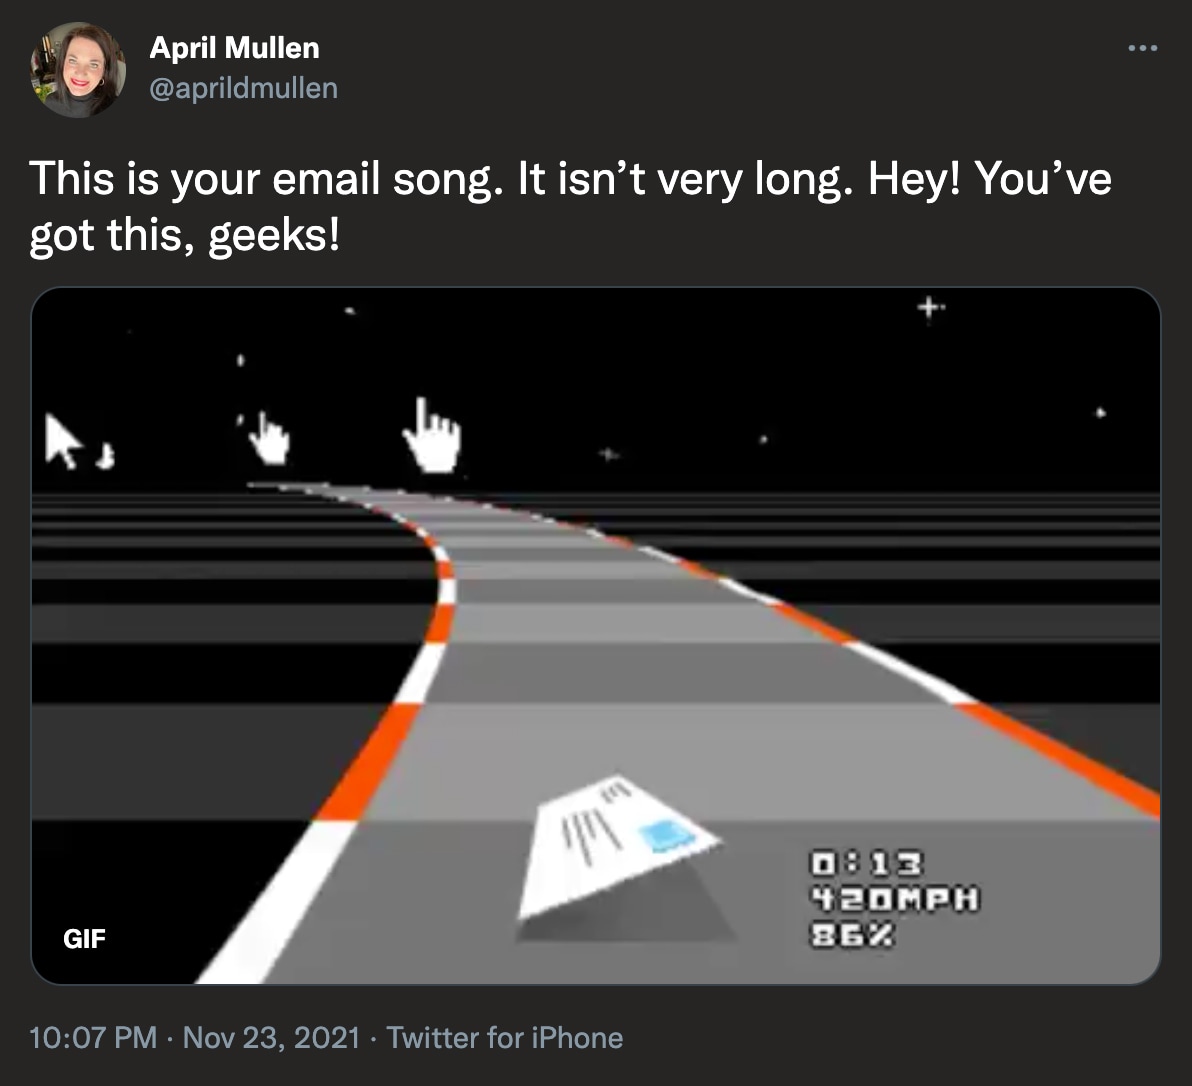 @aprildmullen on Twitter: This is your email song. It isn't very long. Hey! You've got this geeks!